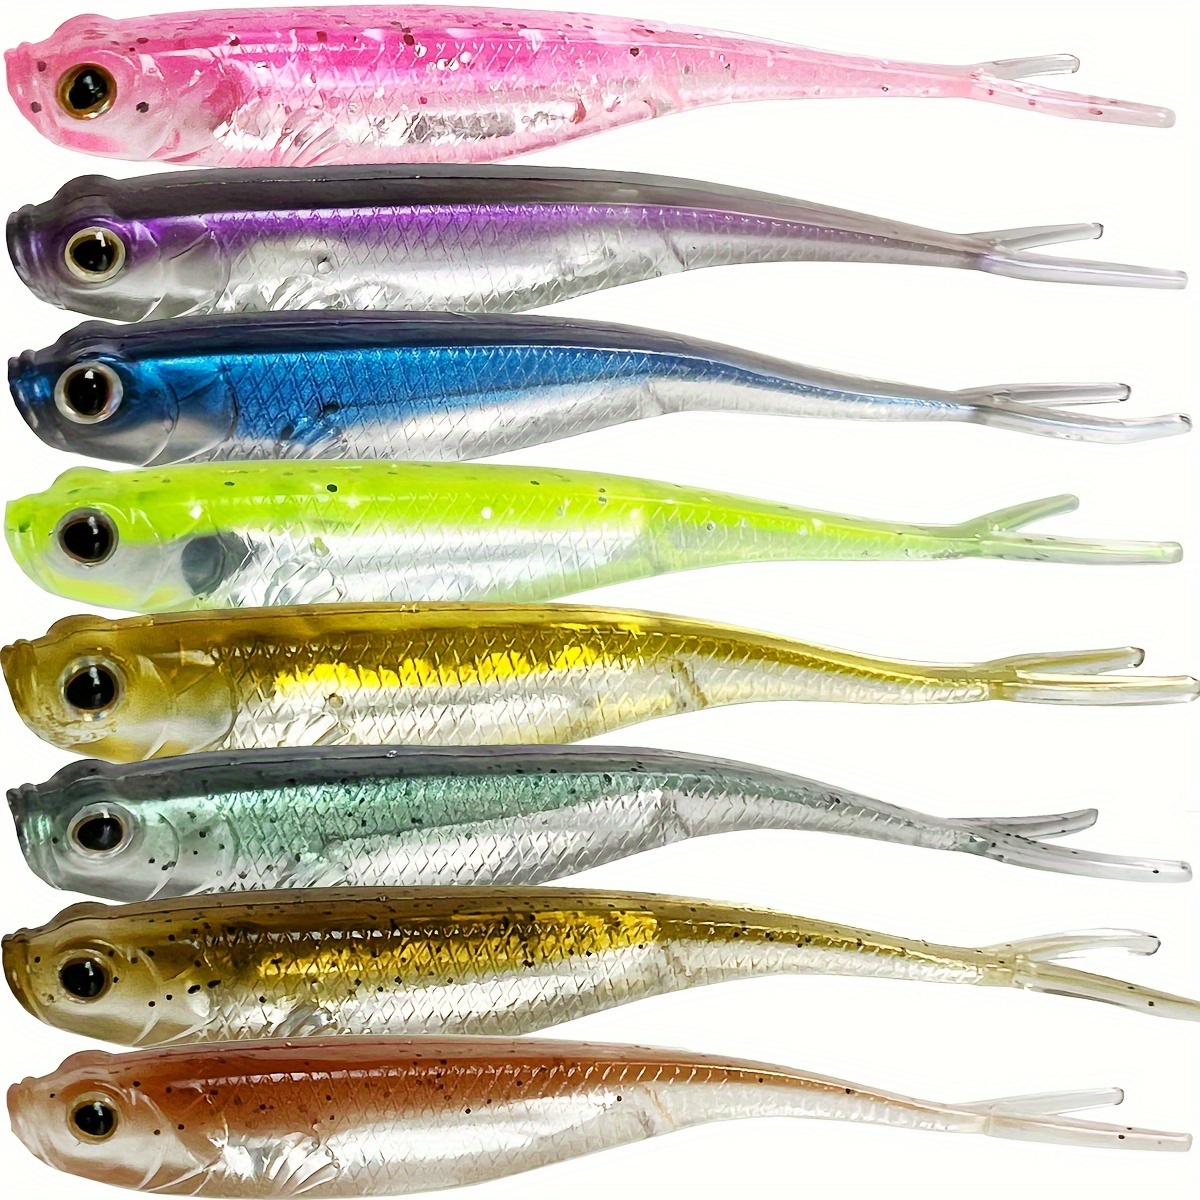  70pcs Soft Plastic Crawfish Bait Fishing Lure for Crappie,  Bass, Bluegill, White Perch, Sunfish, Speckled Trout All Panfish Softlure  Artificial Crayfish Lures Bait Slow Sinking (4cm/1g - 70pcs(D)) : Sports